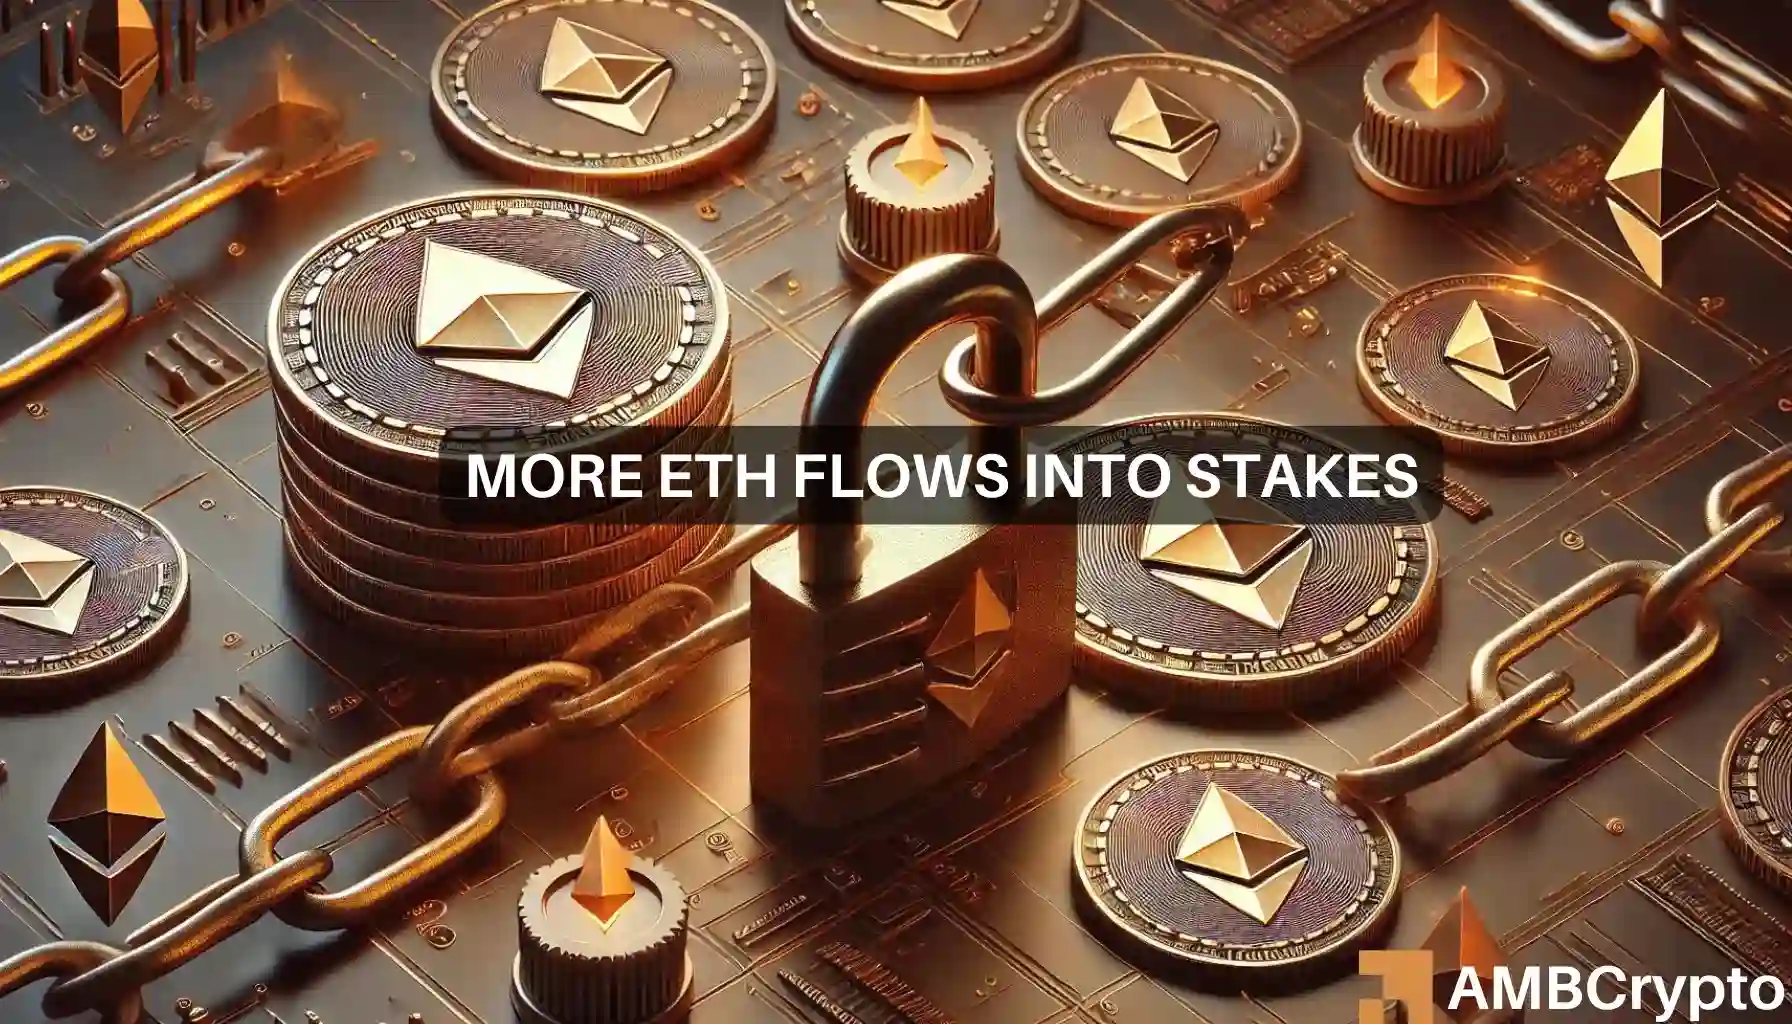 Ethereum staking rises, exchange reserves dip: What this means for ETH